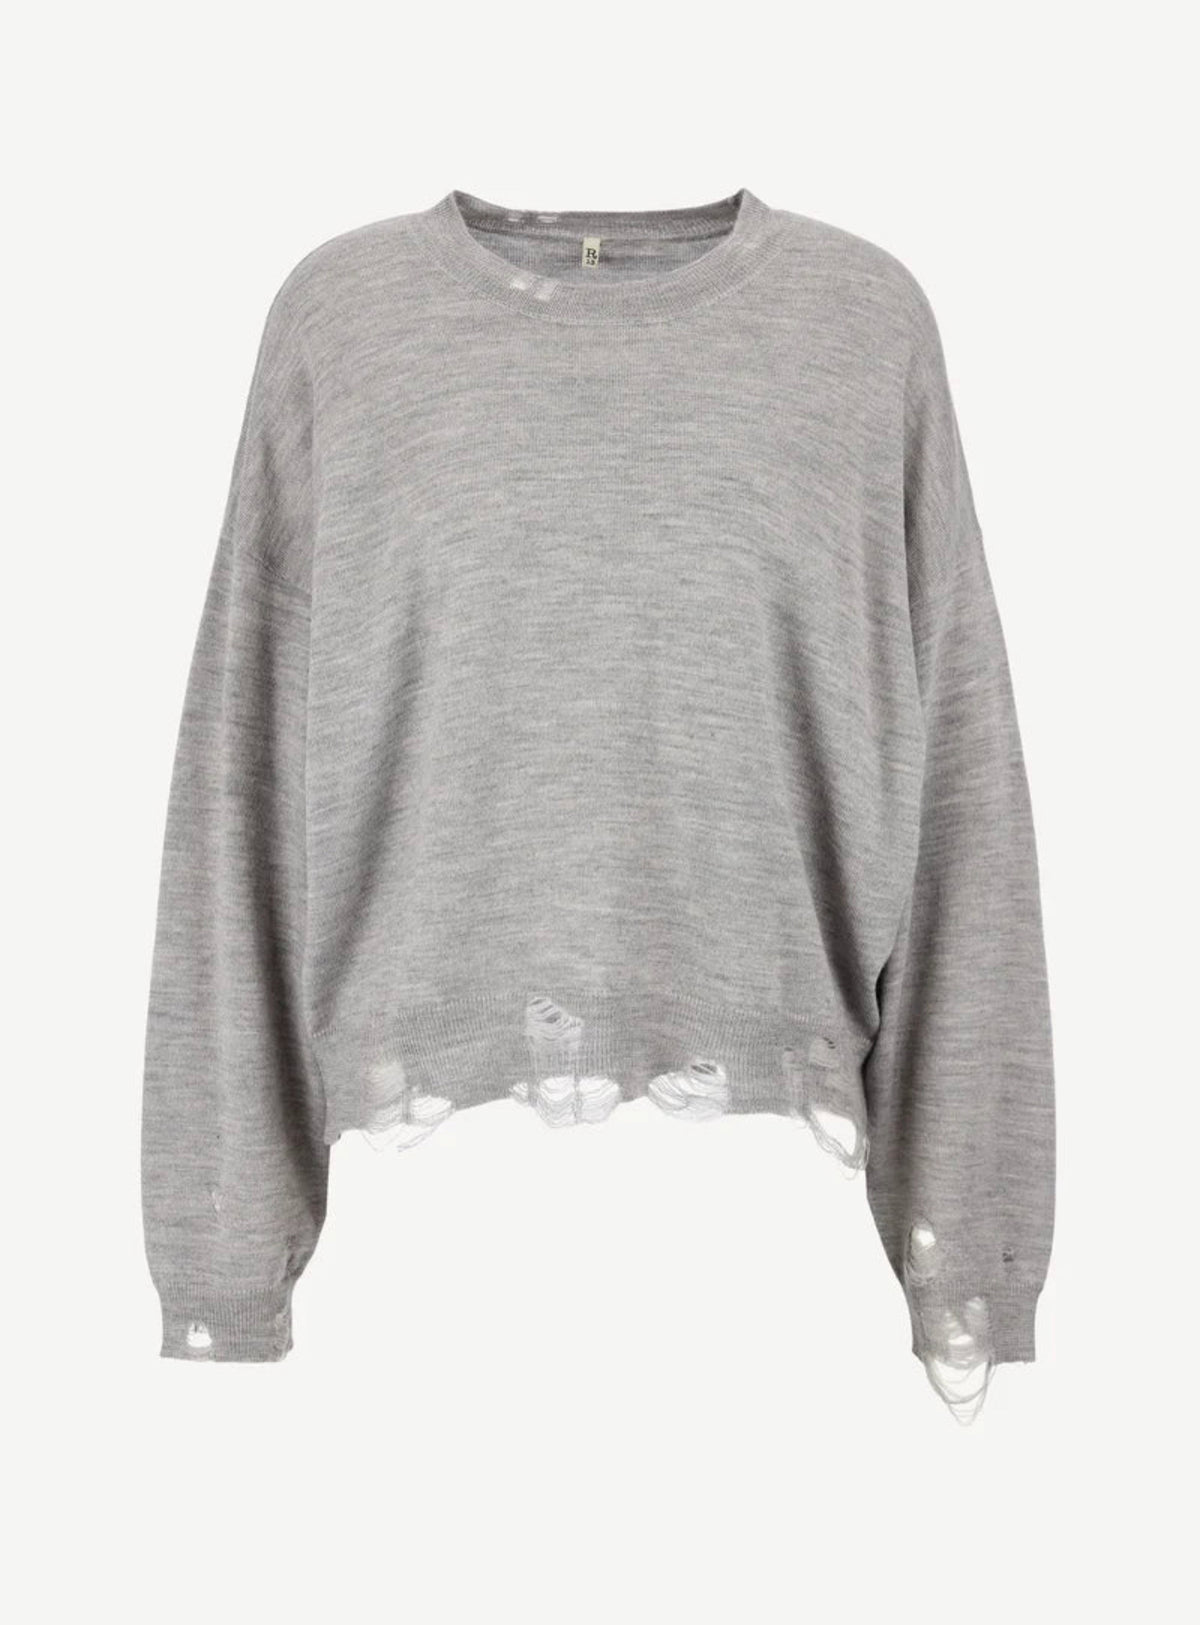 R13 Distressed cropped oversized Pullover